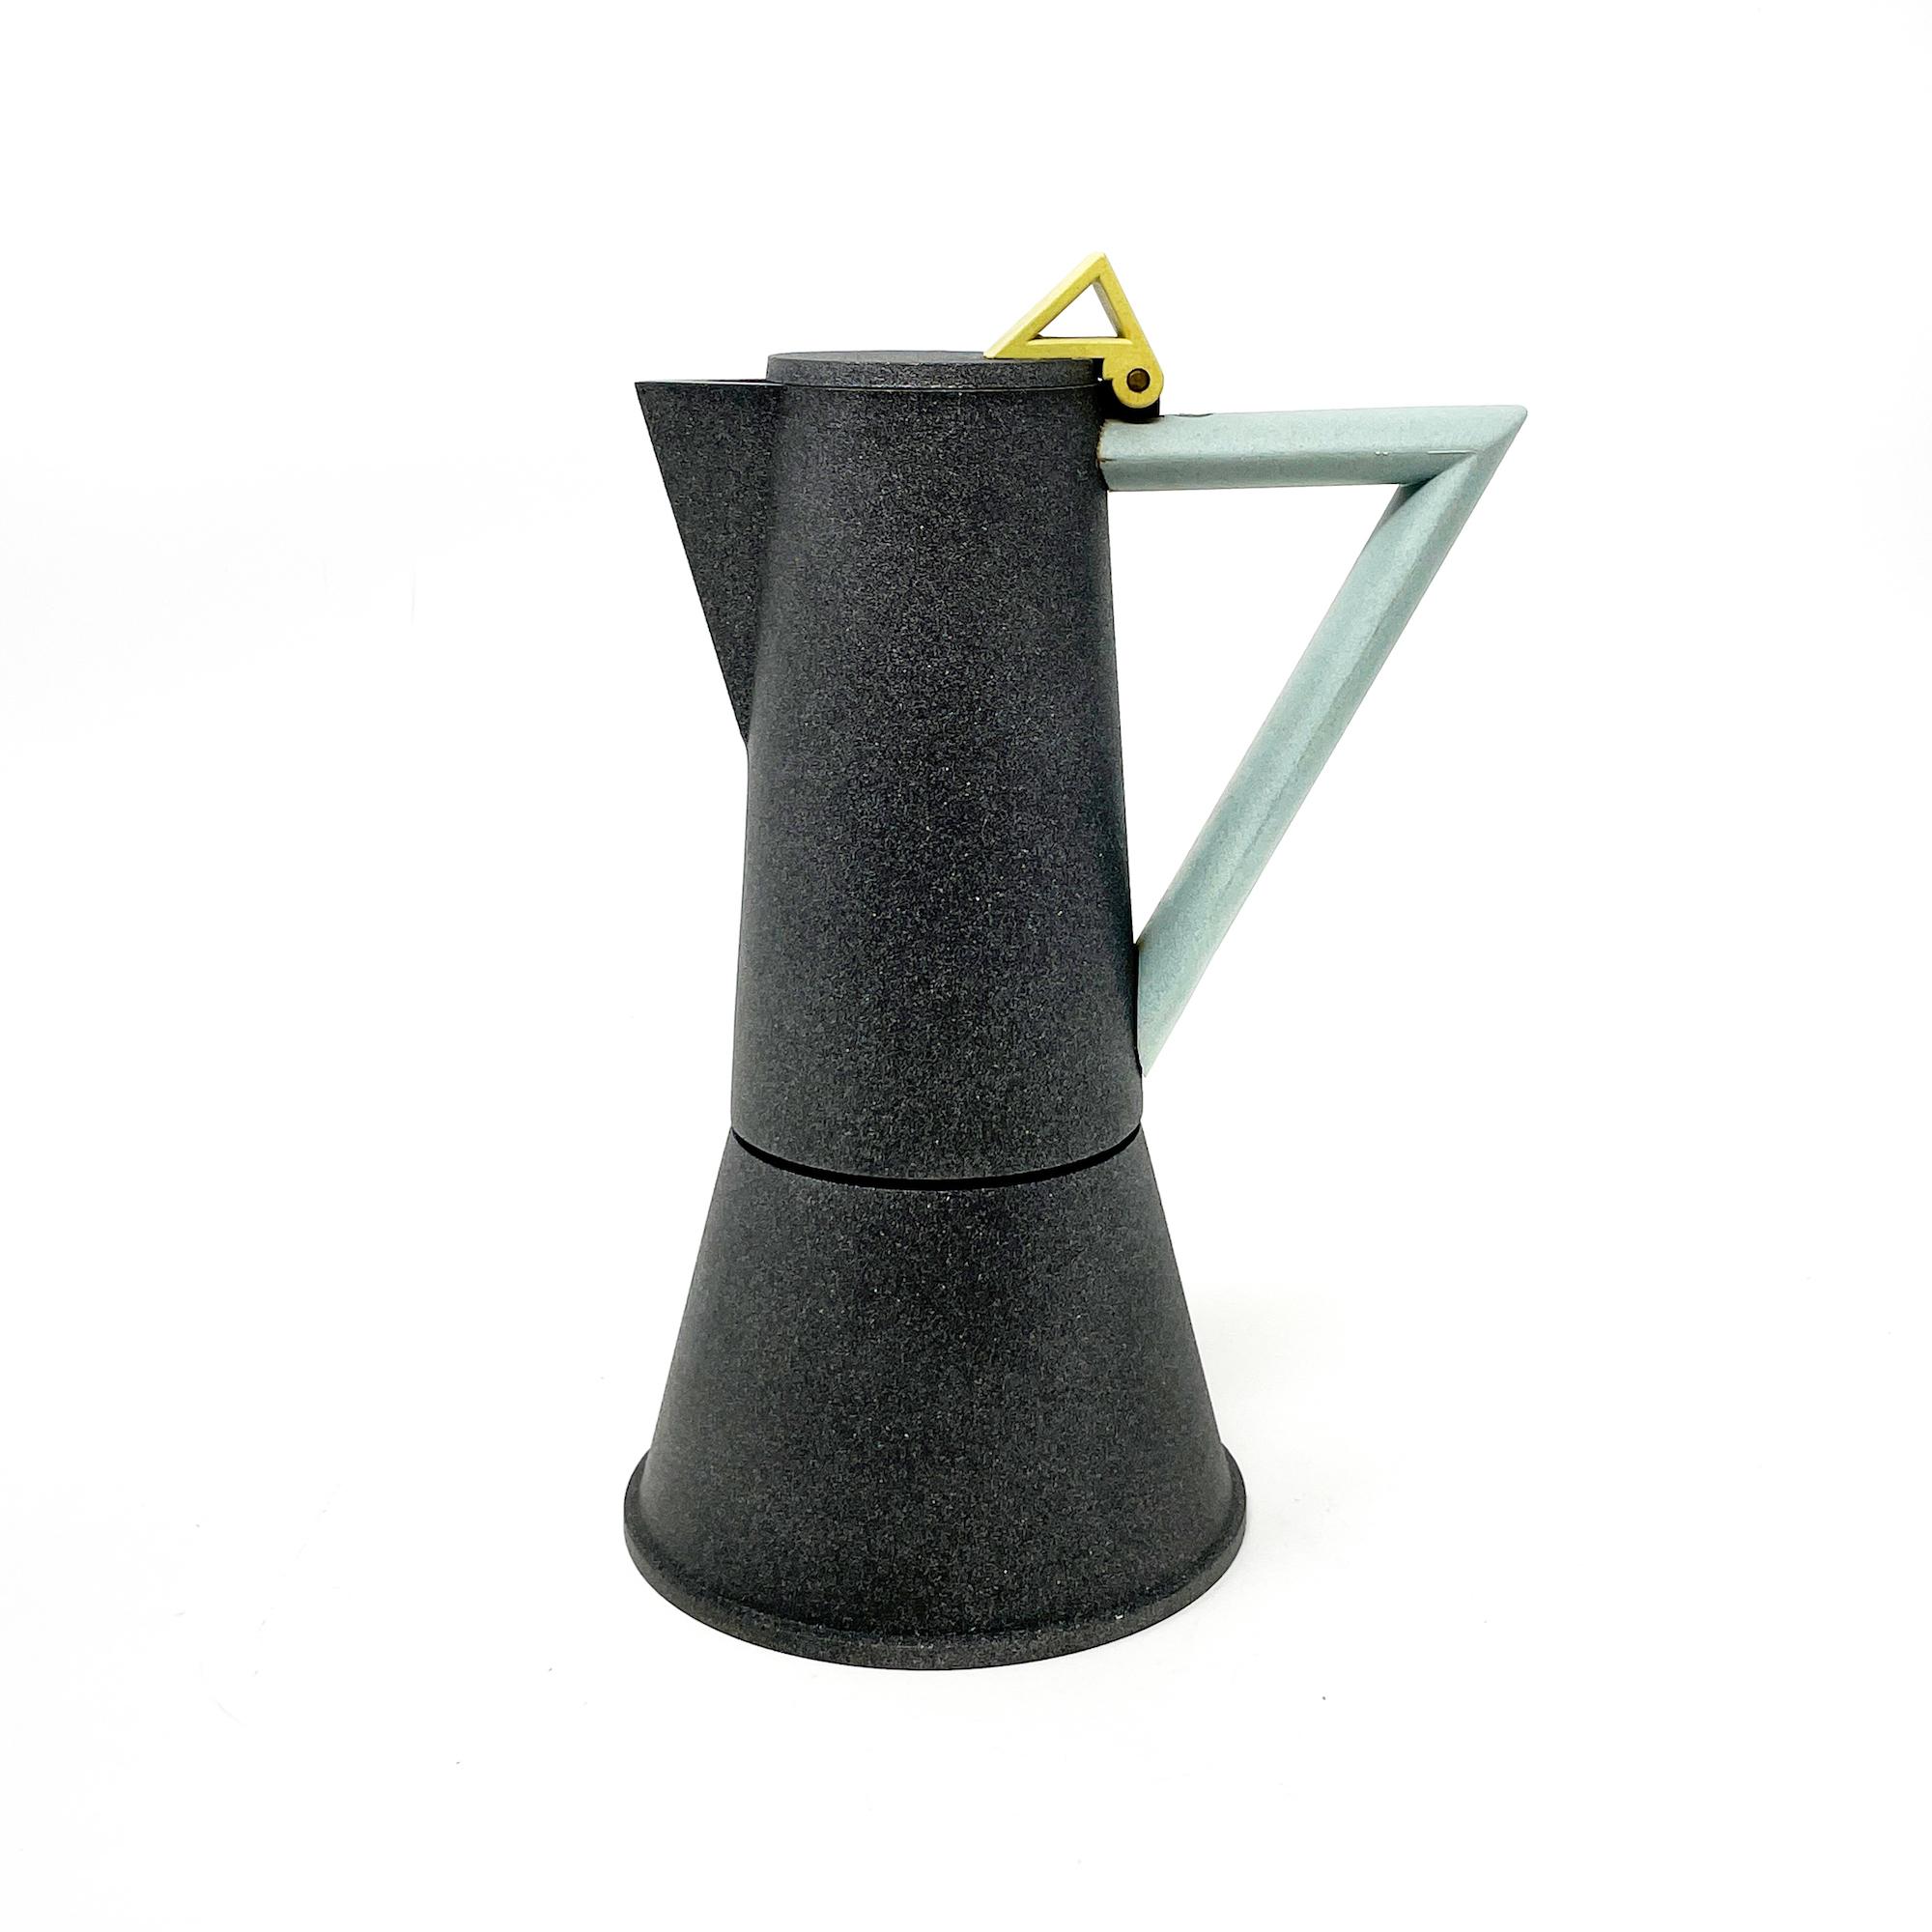 A quintessentially postmodern espresso pot/coffee maker designed by the Memphis Milano master, Ettore Sottsass, for Lagostina in the 1980s. From Lagostina’s Accademia line, this rare piece was made in Italy and available in a handful of color